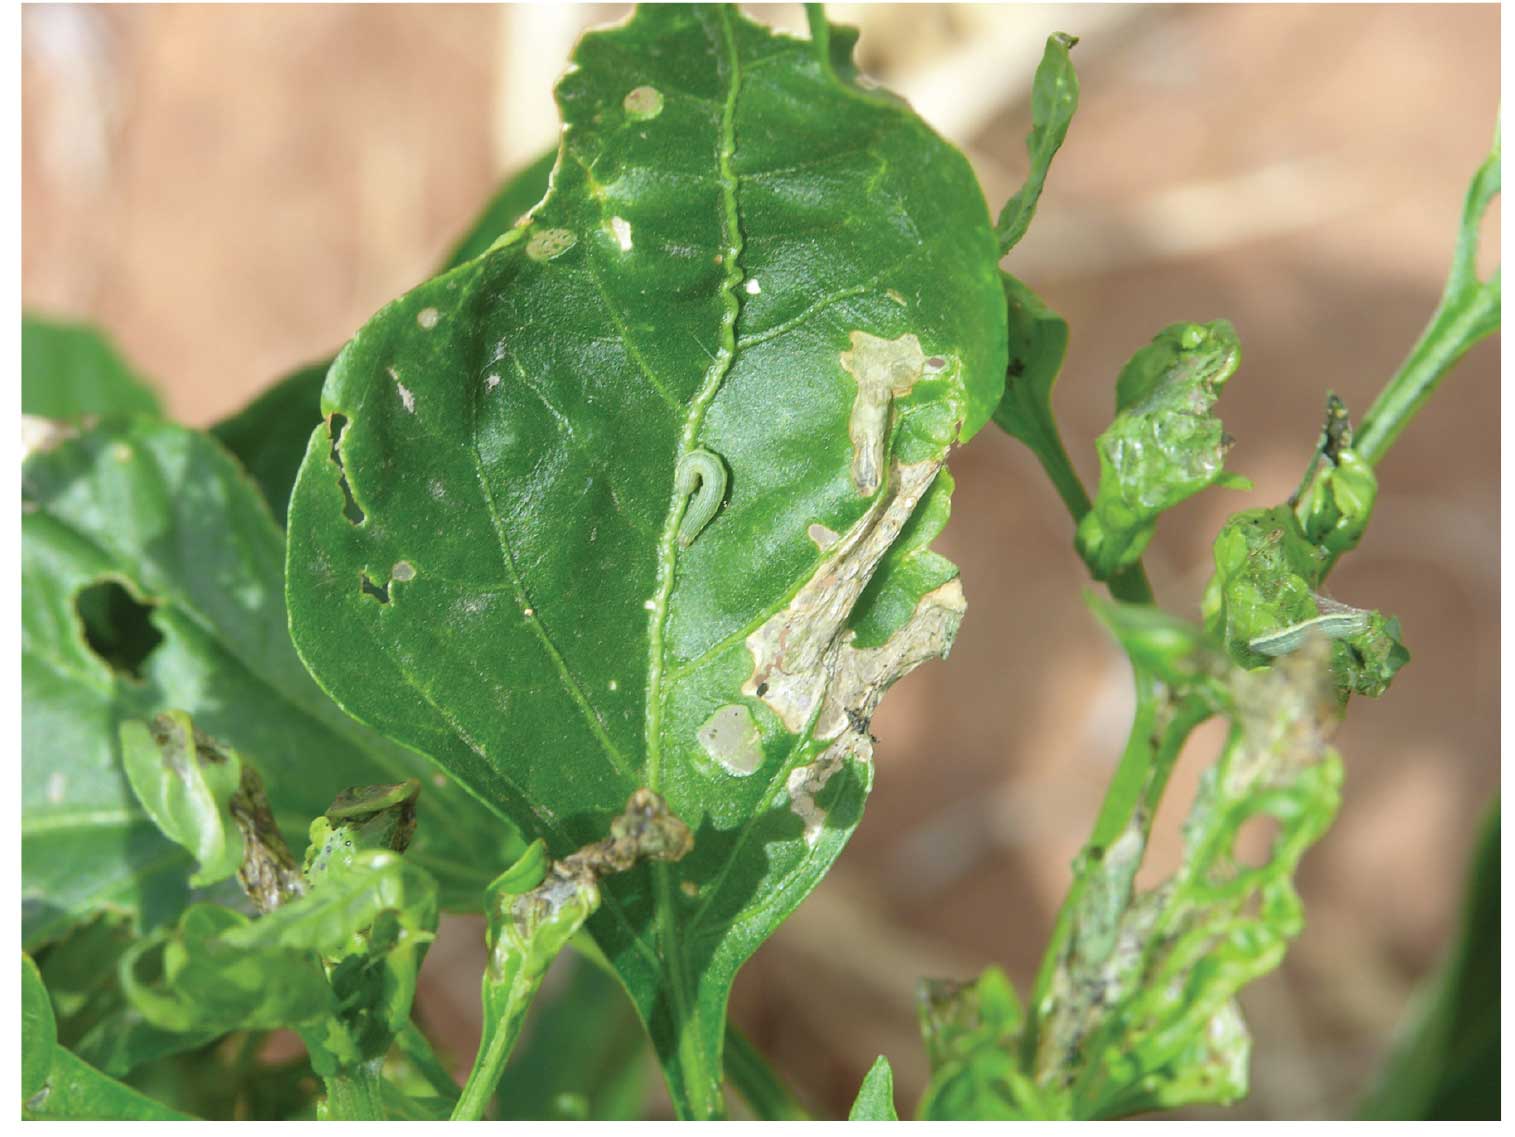 Photograph of fall armyworm damage to chile plants.